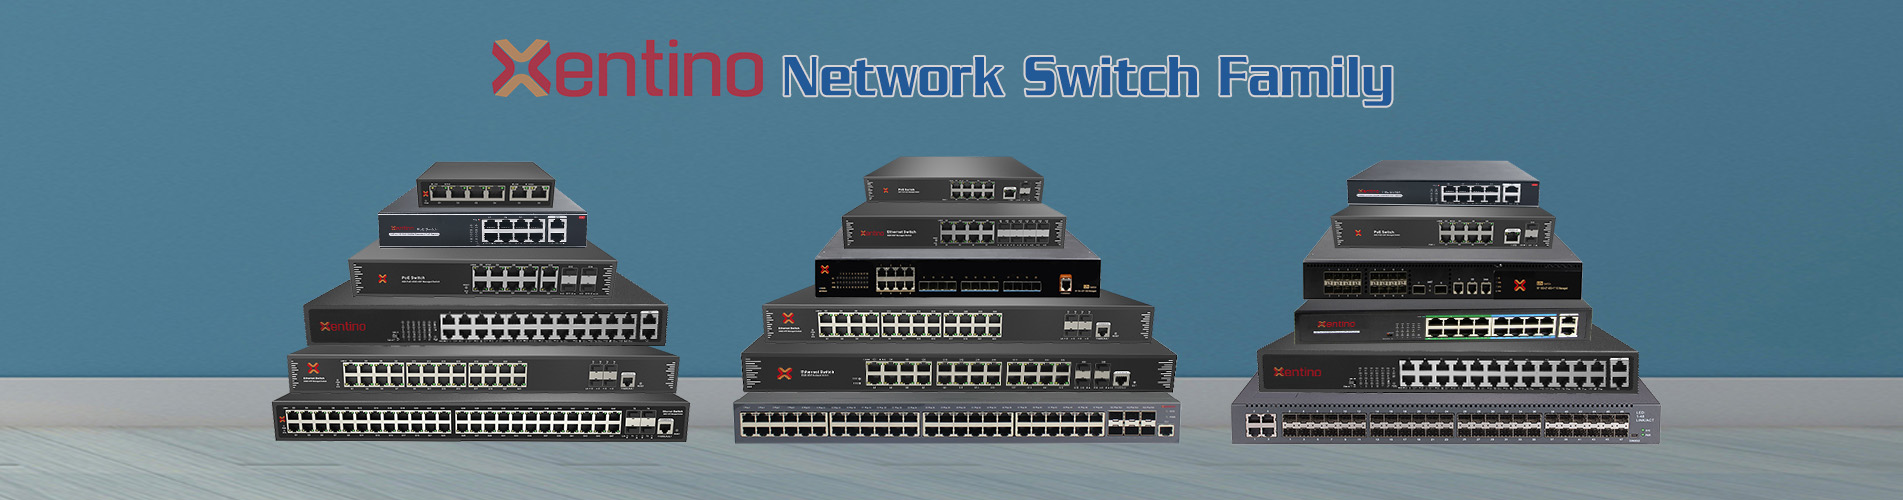 Xentino Network Switch Series